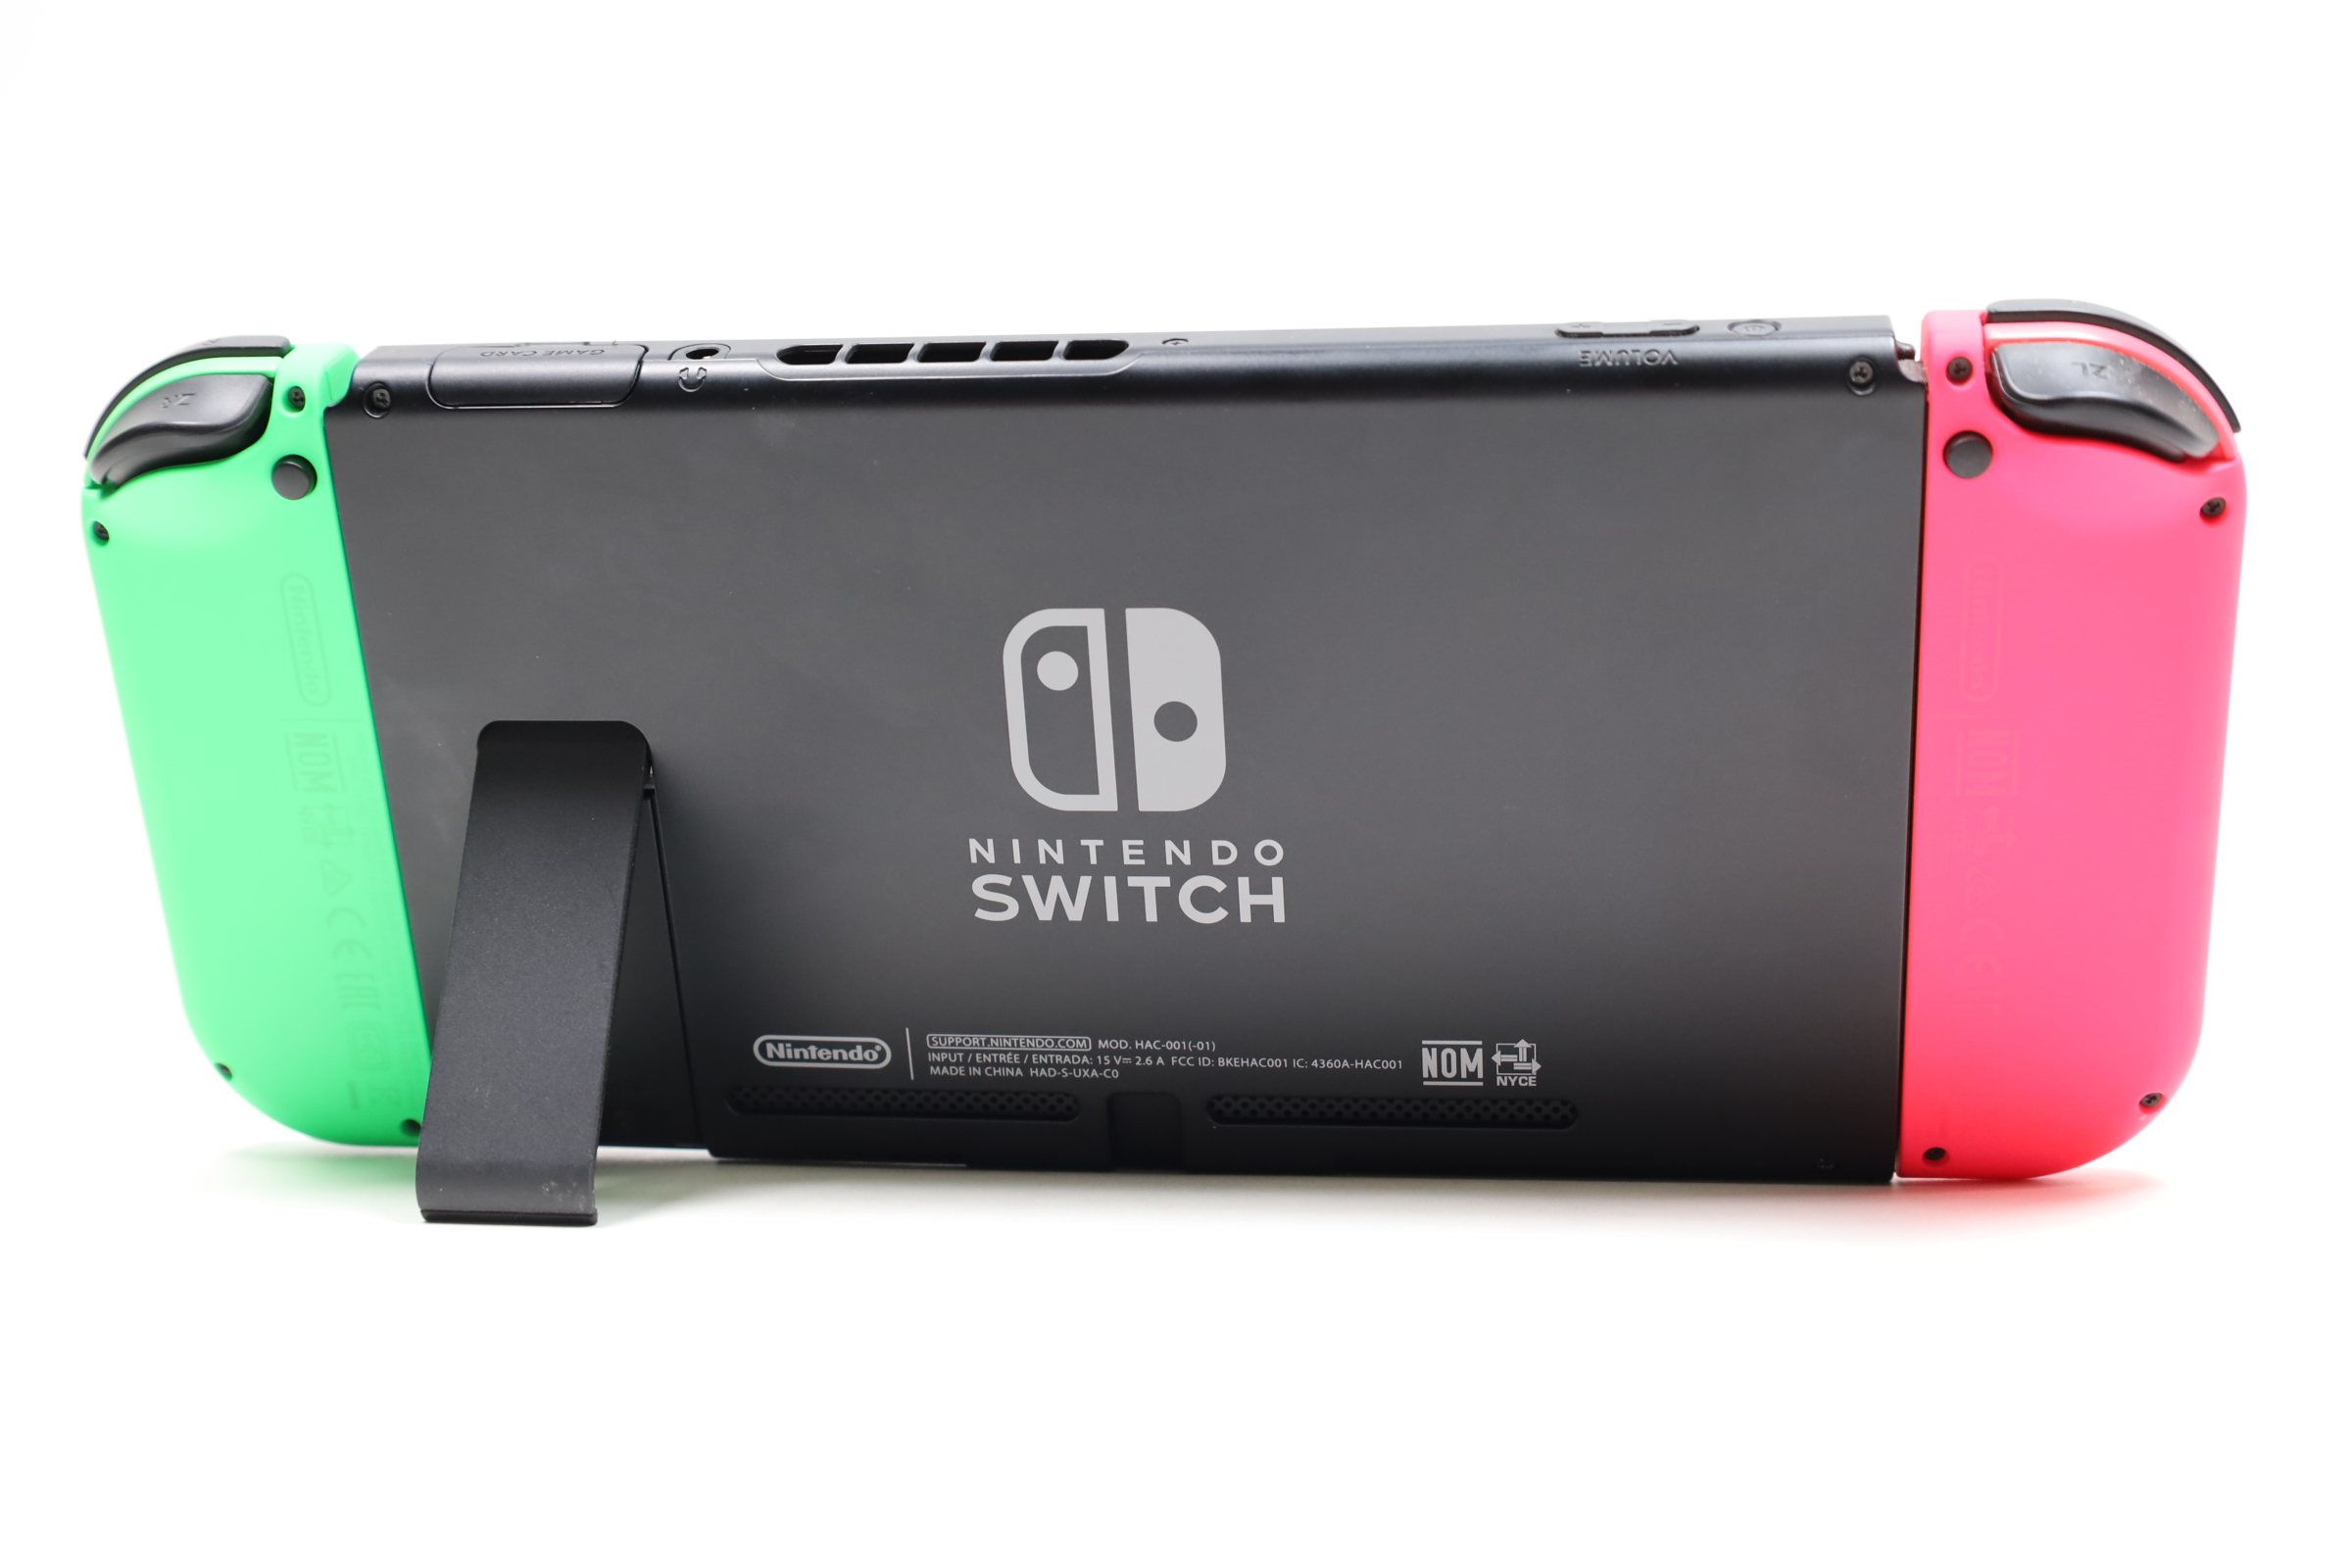 Nintendo Switch HAC-001(-01) 32GB Pink/Green Video Game System (2136)